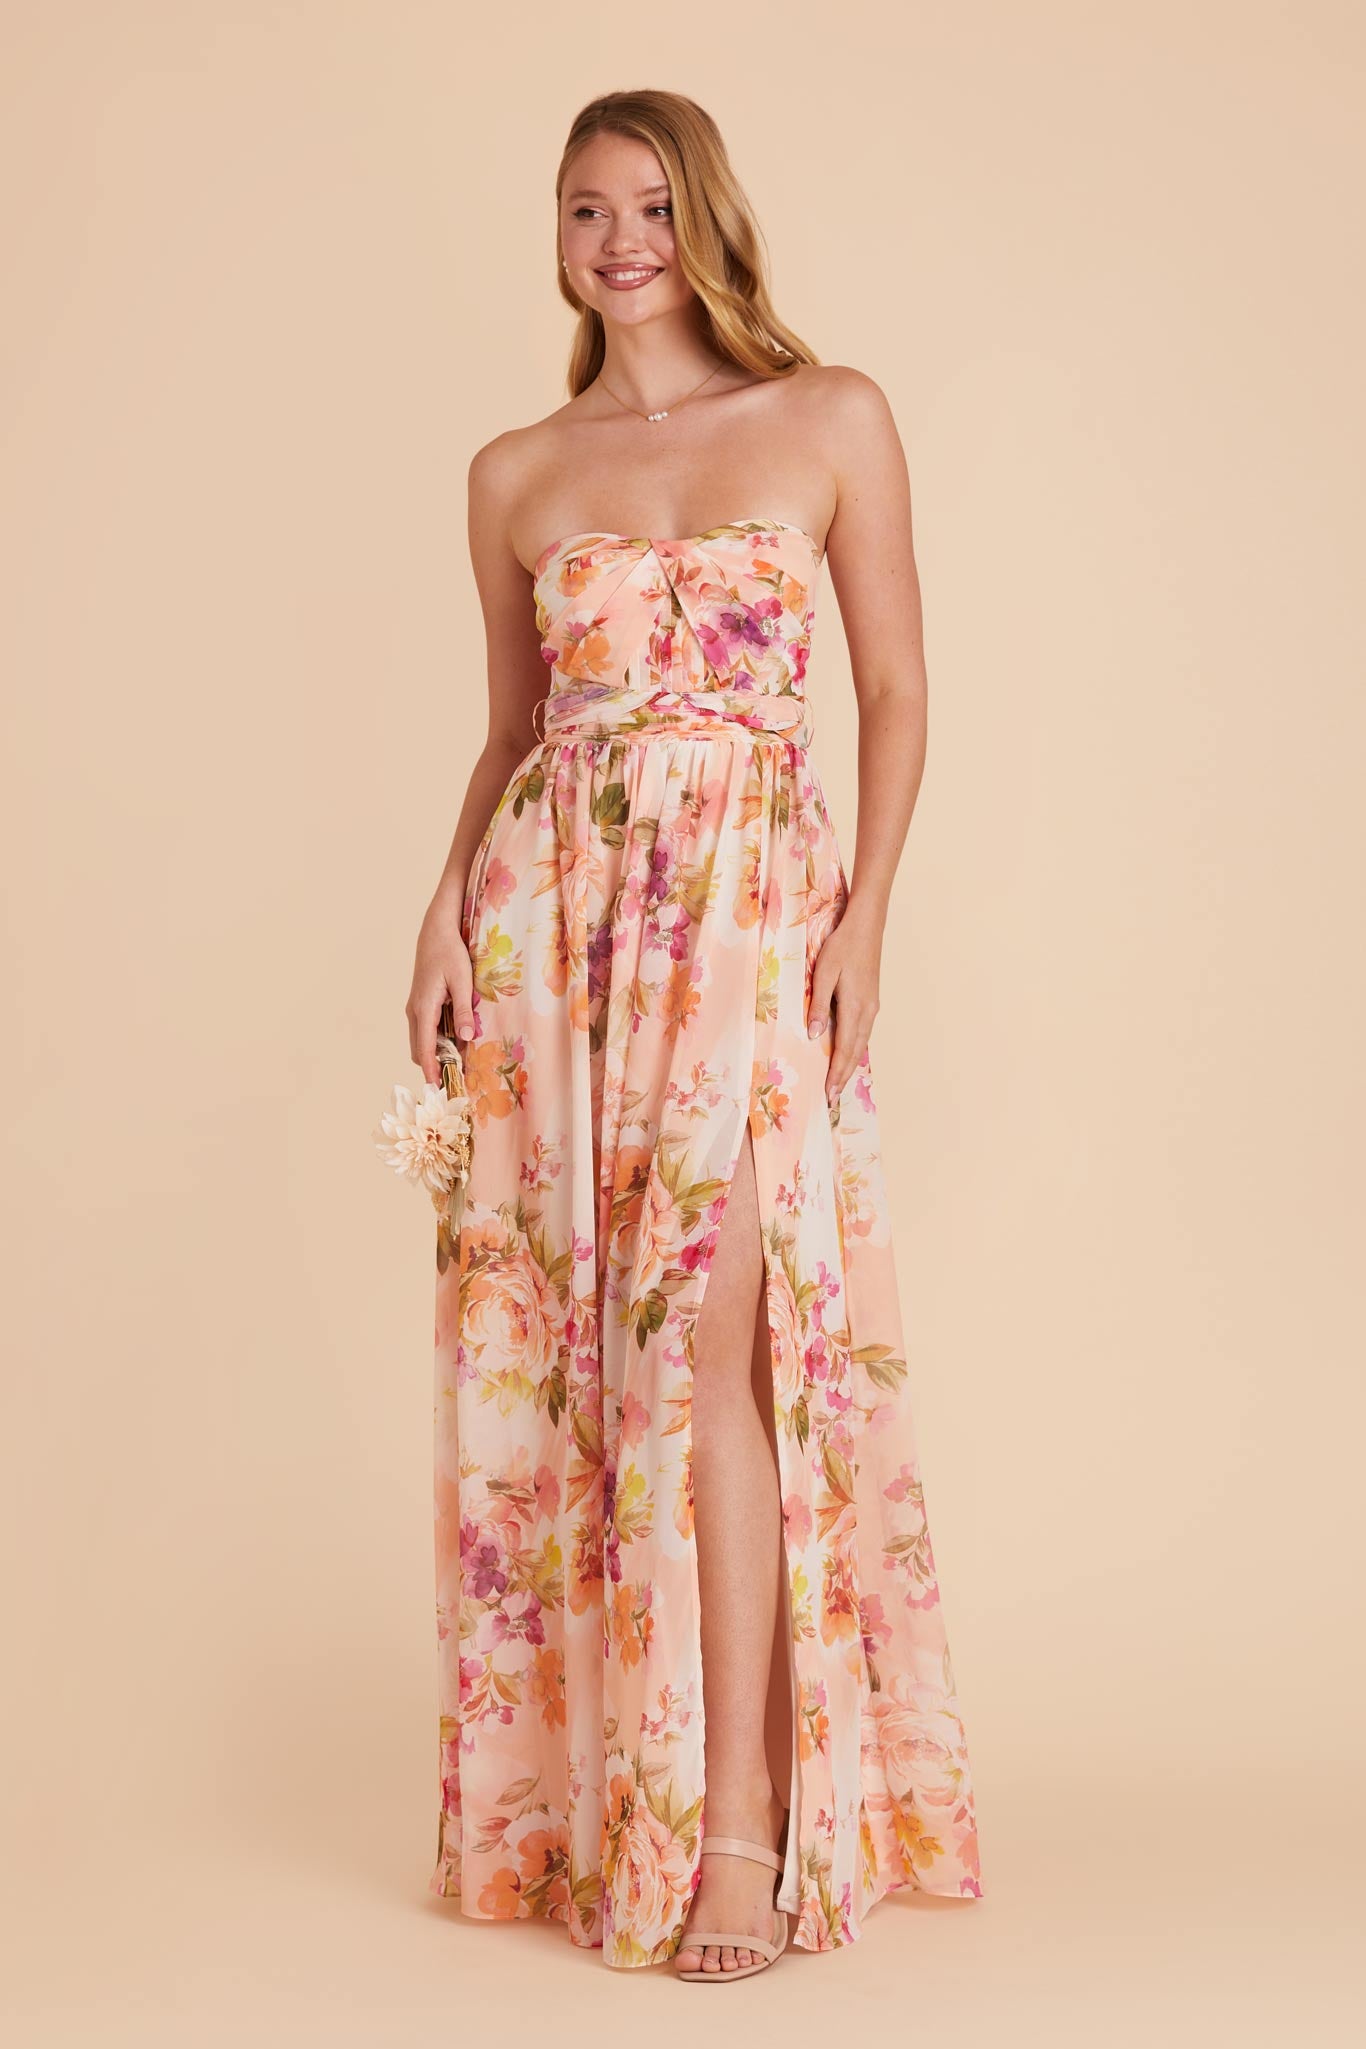 Coral Sunset Peonies Grace Convertible Dress by Birdy Grey